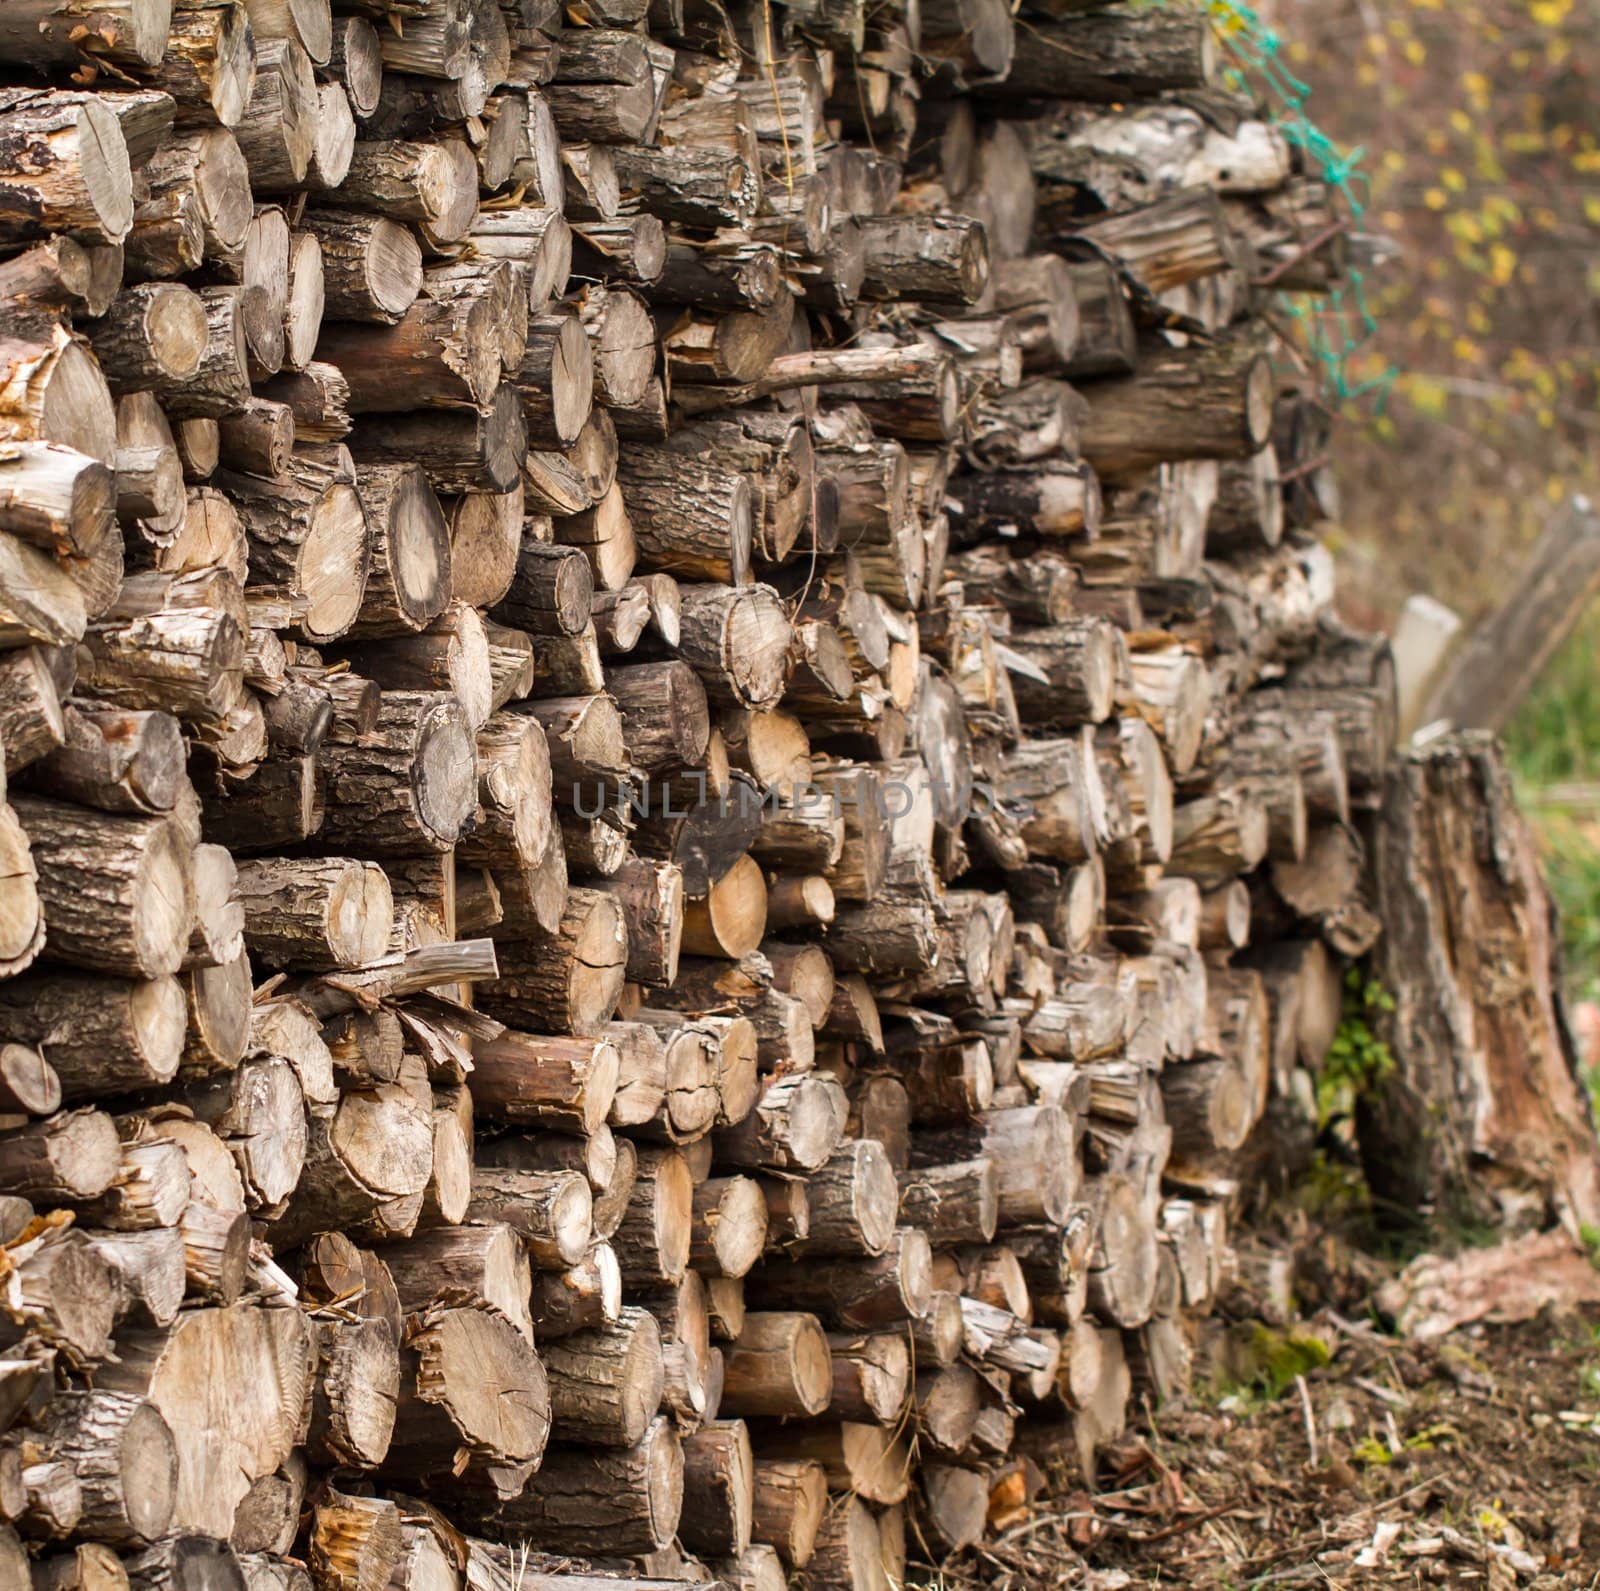 Winter firewood stacked in a pile